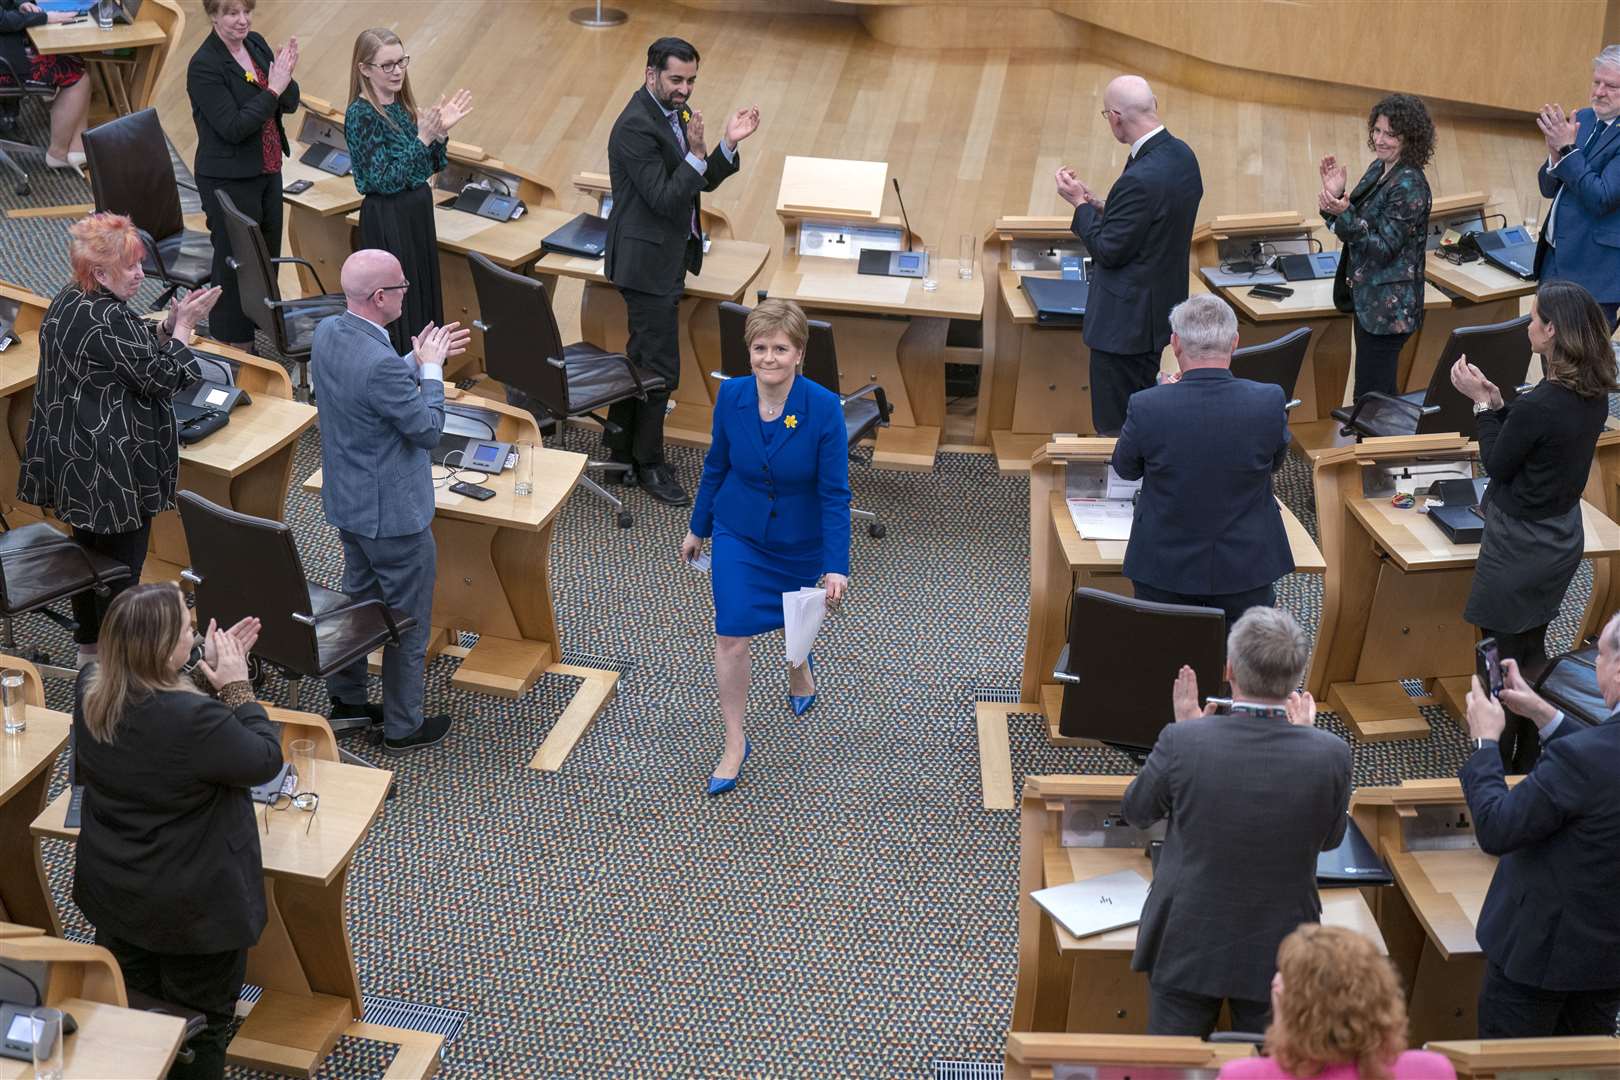 Nicola Sturgeon received a standing ovation as she left the Holyrood chamber following her last session of First Minister’s Questions (Jane Barlow/PA)